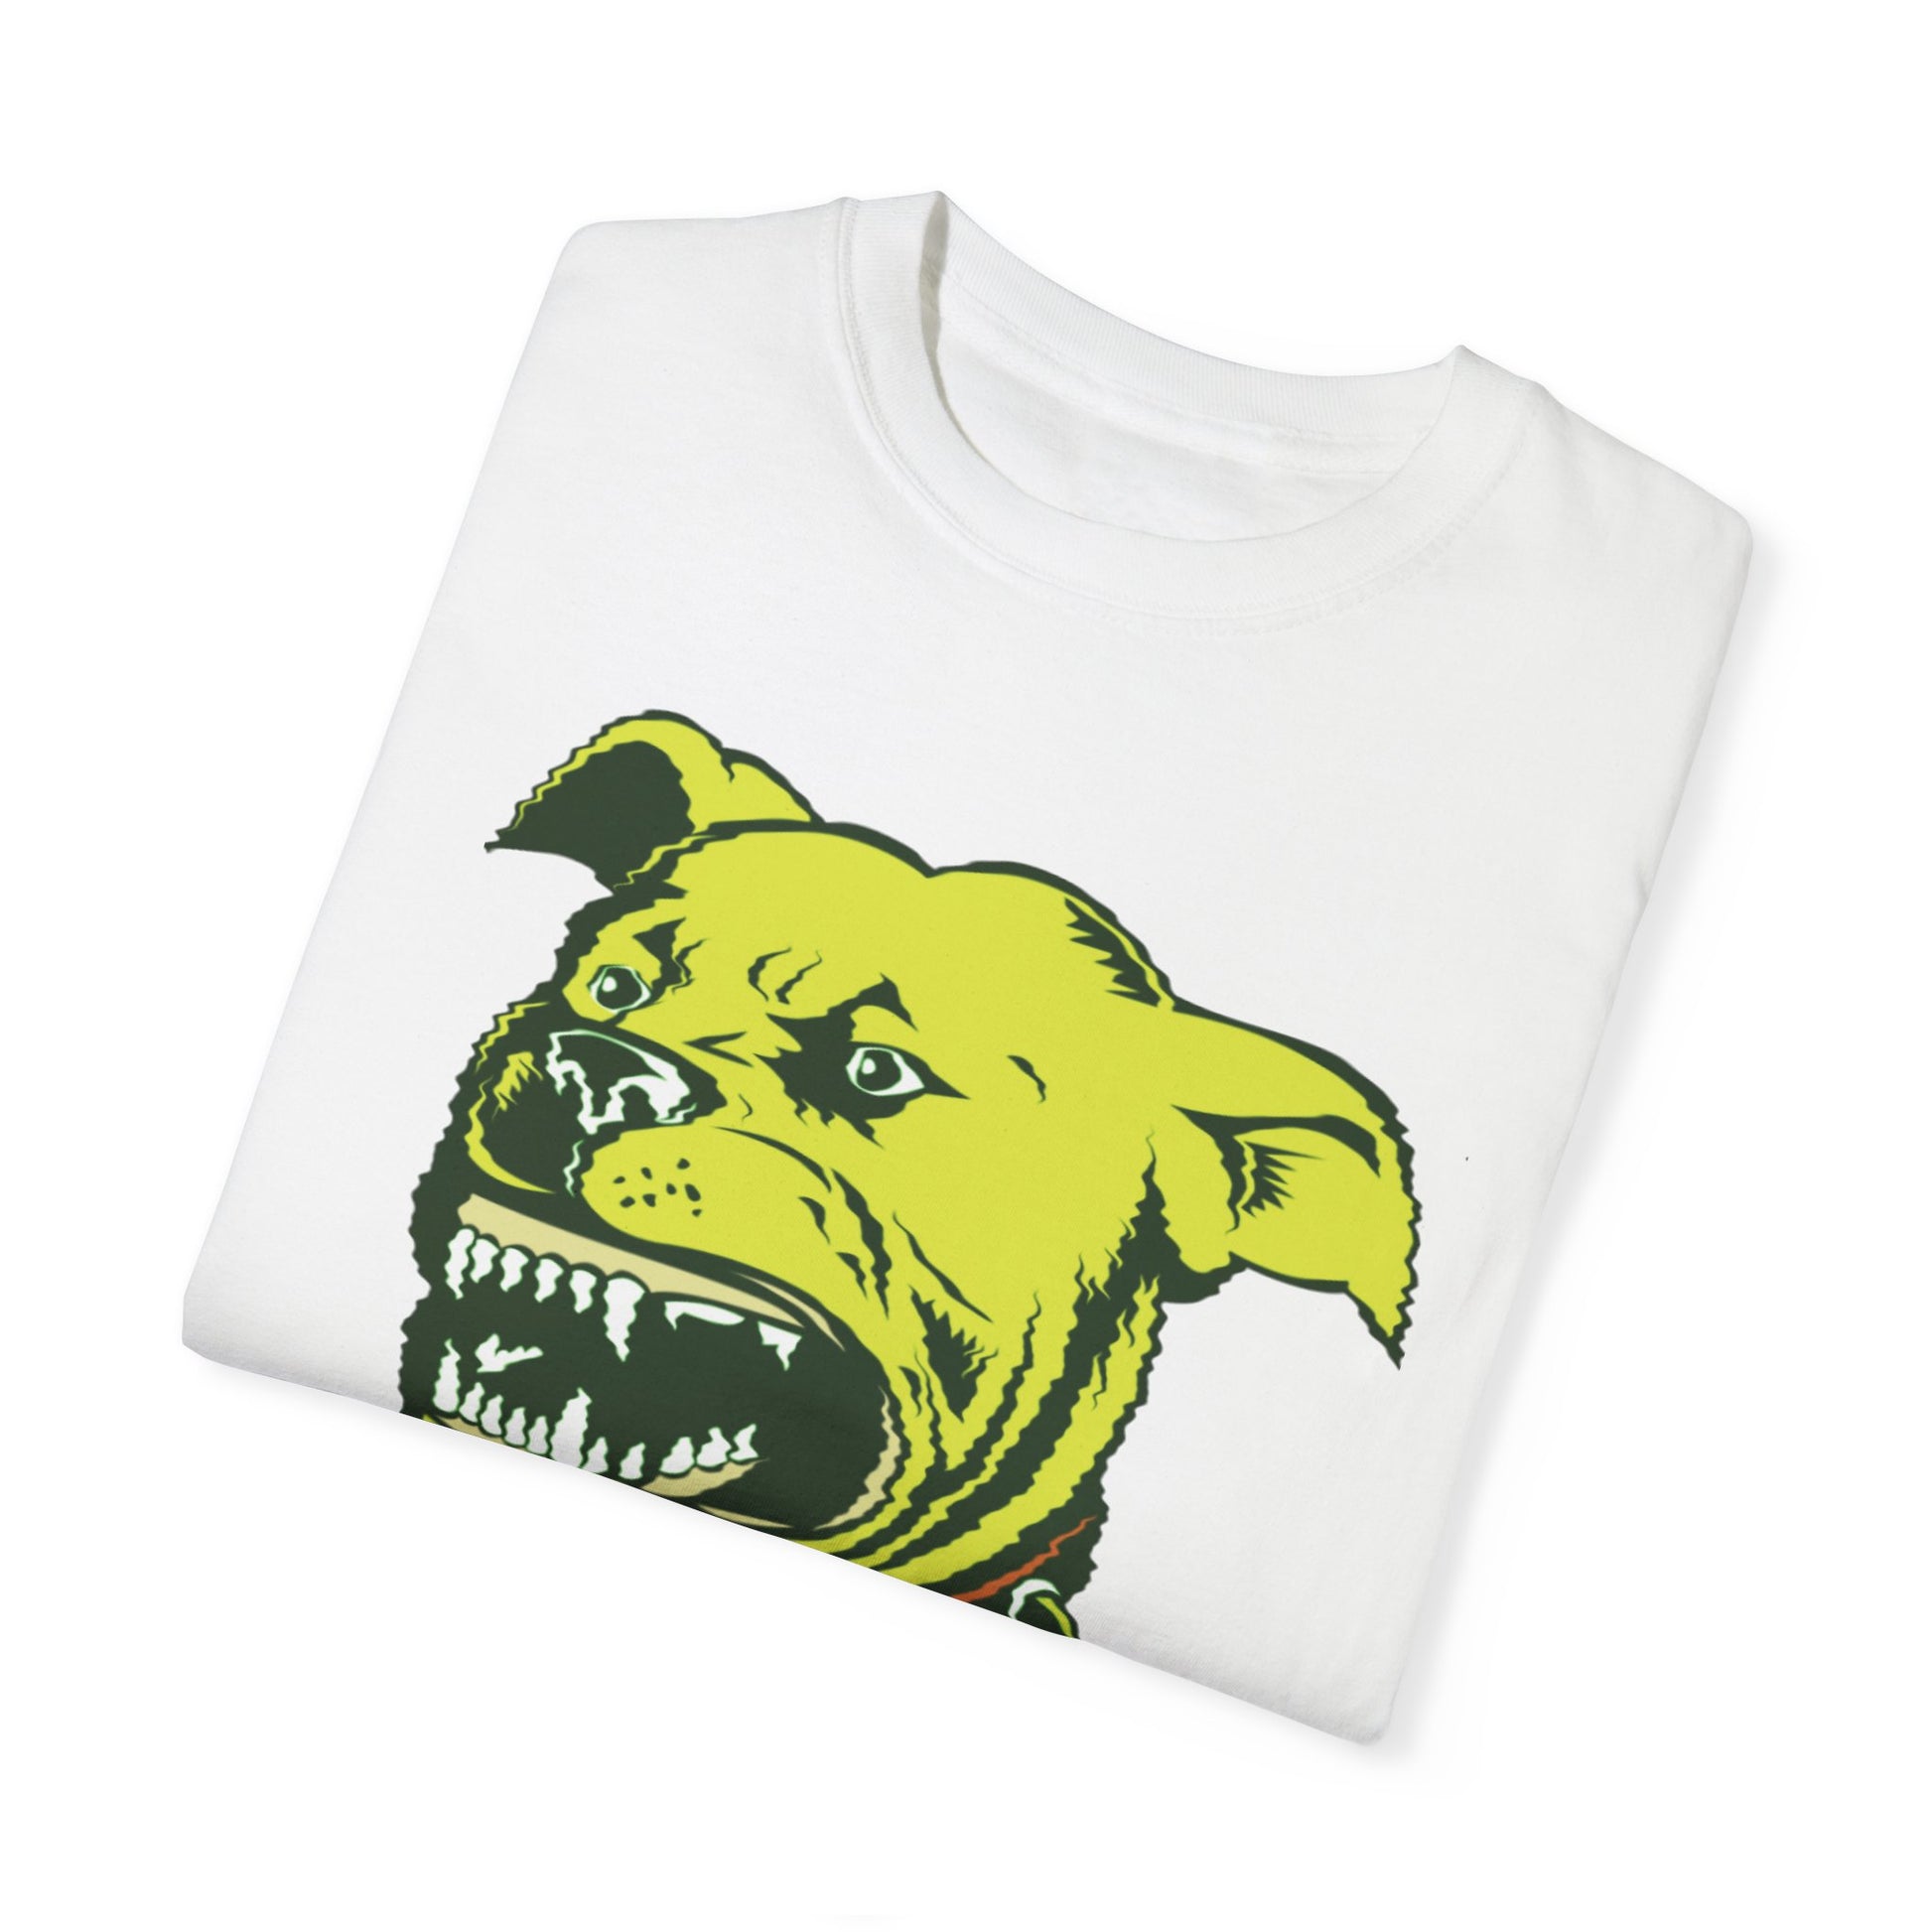 Casual White T-Shirt w/ Dog Graphic